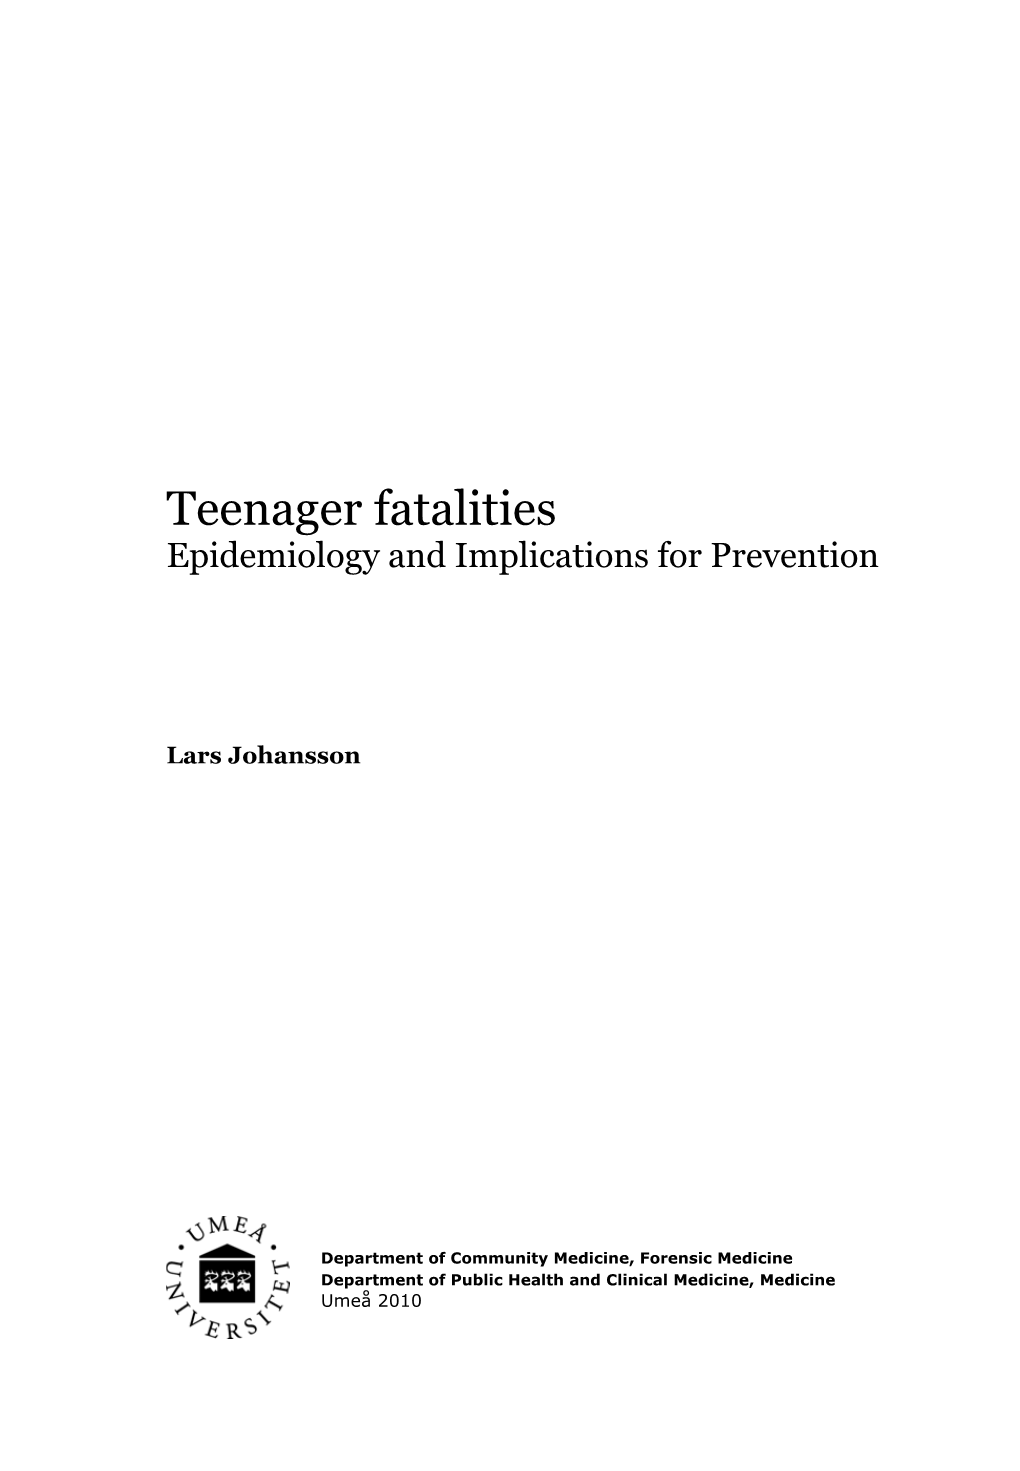 Teenager Fatalities Epidemiology and Implications for Prevention